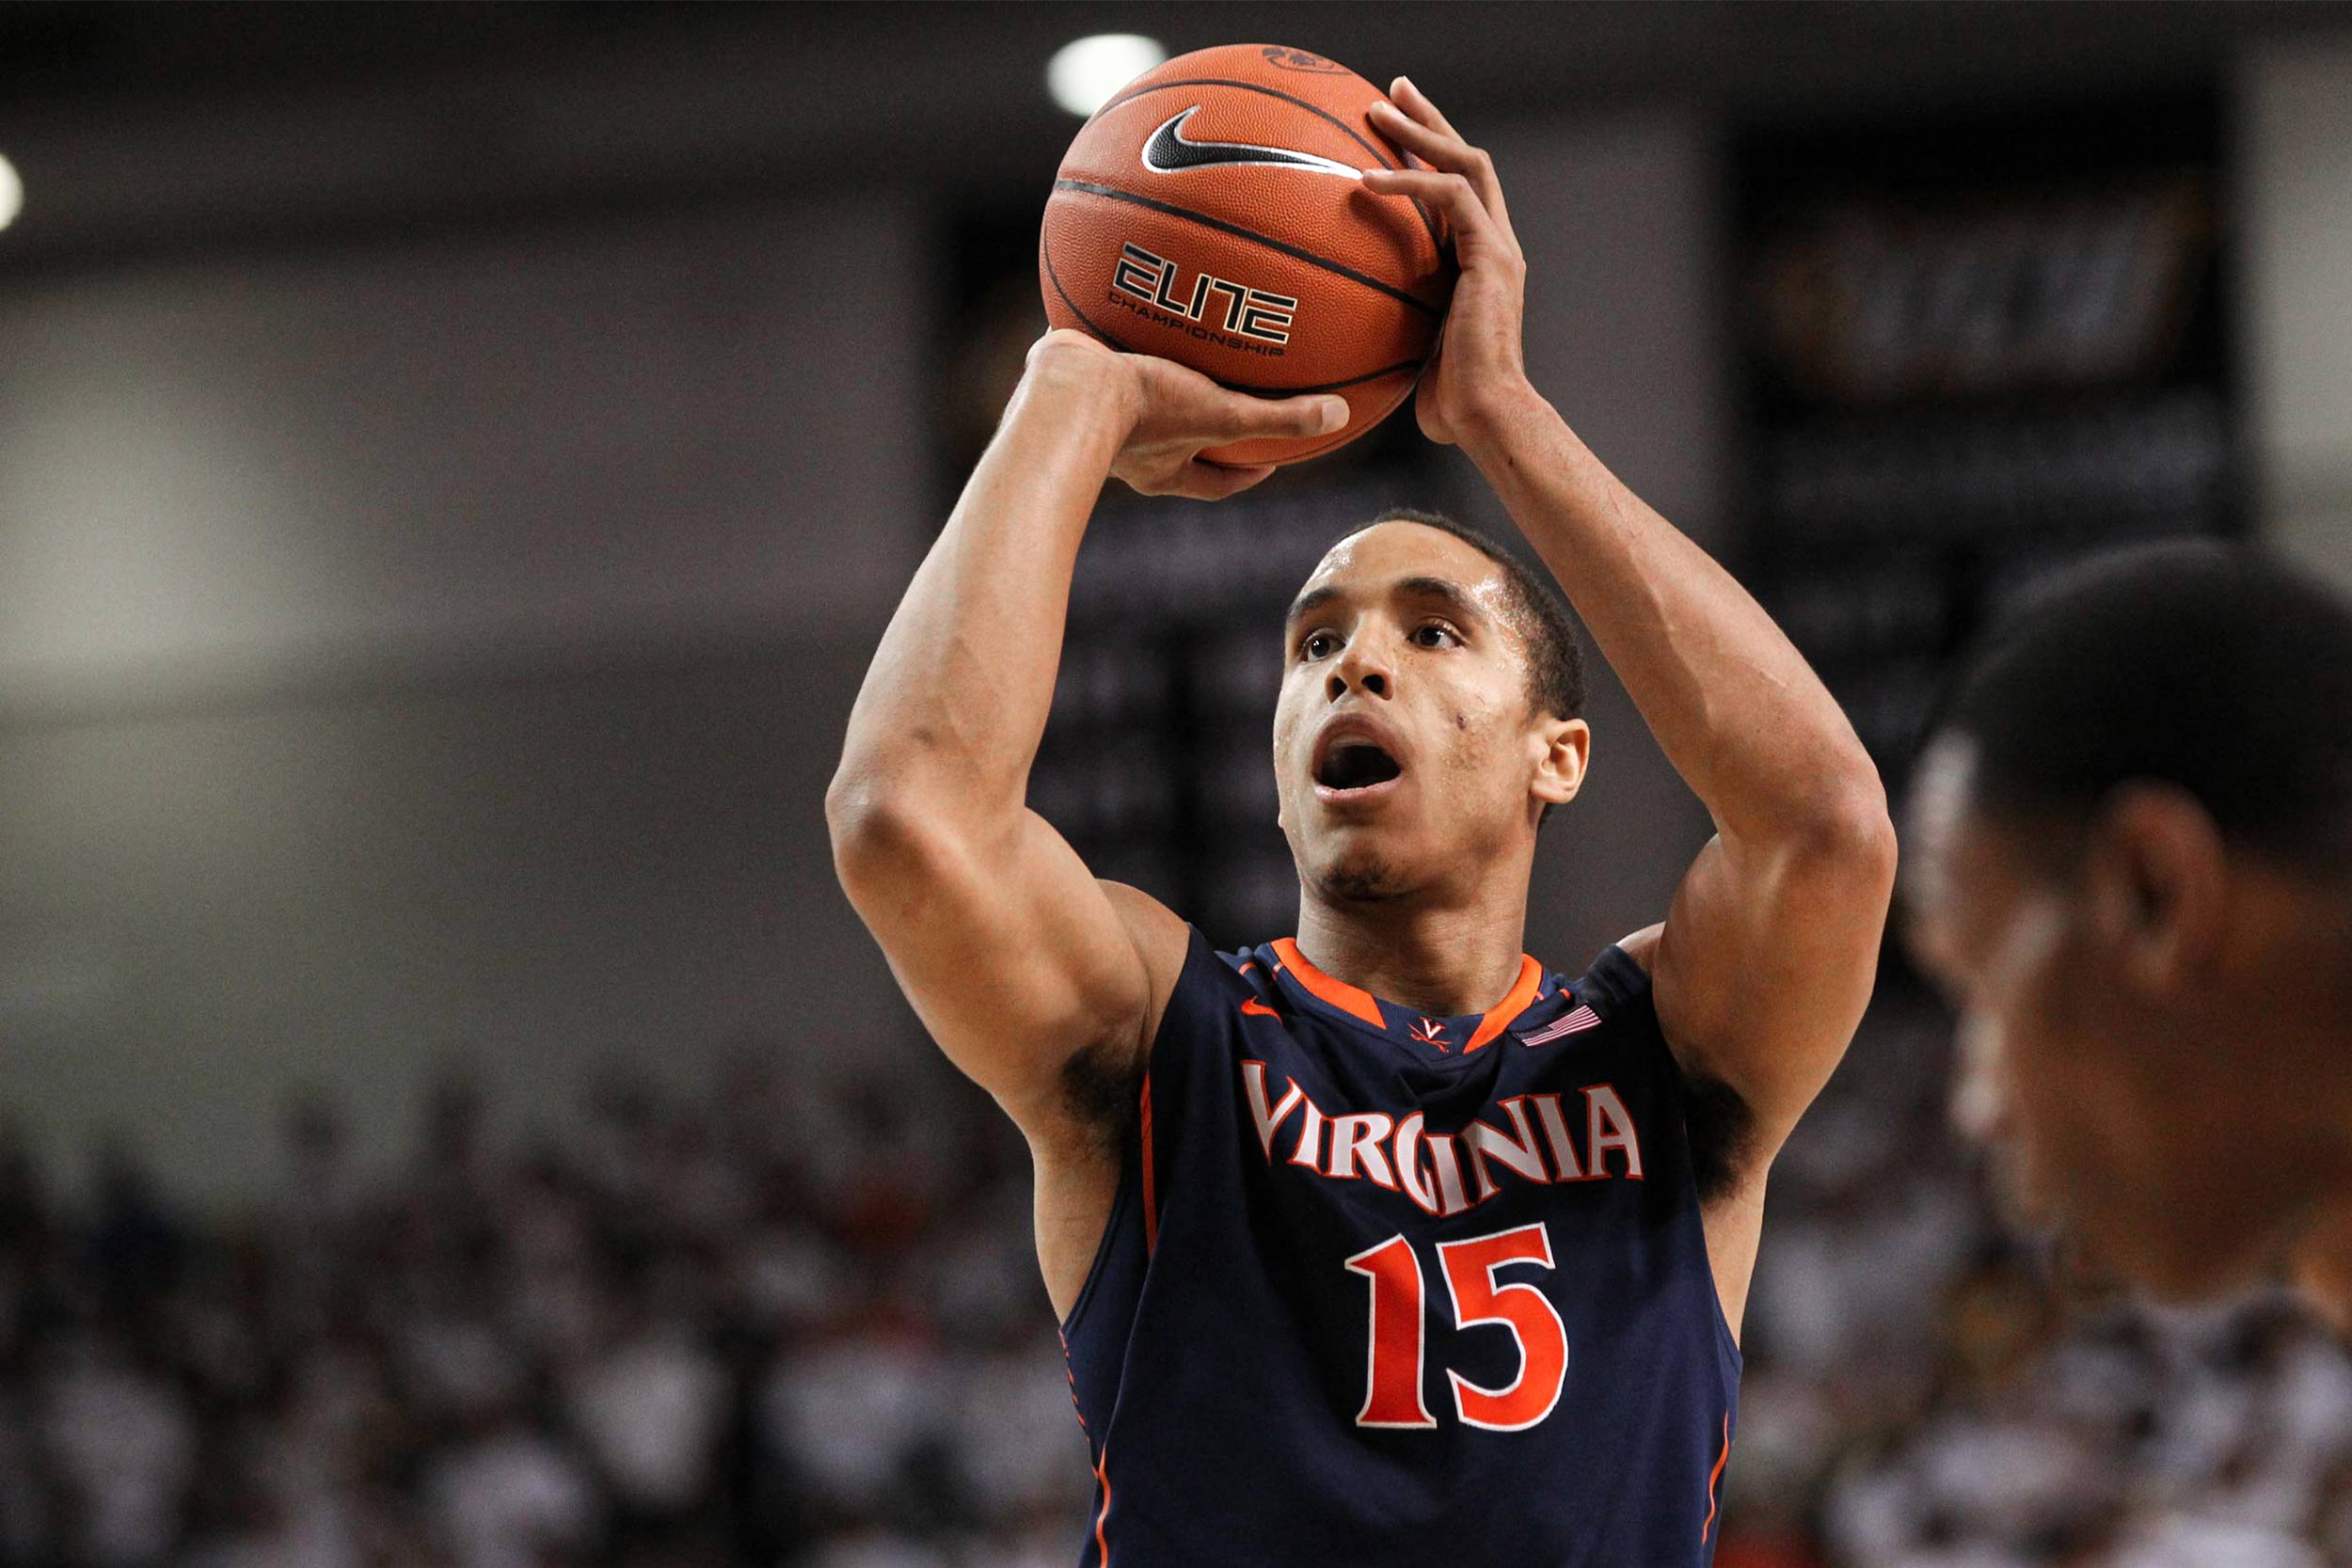 Action shot of Malcolm Brogdon in U V A jersey getting ready to shoot a basket during U V A basketball game